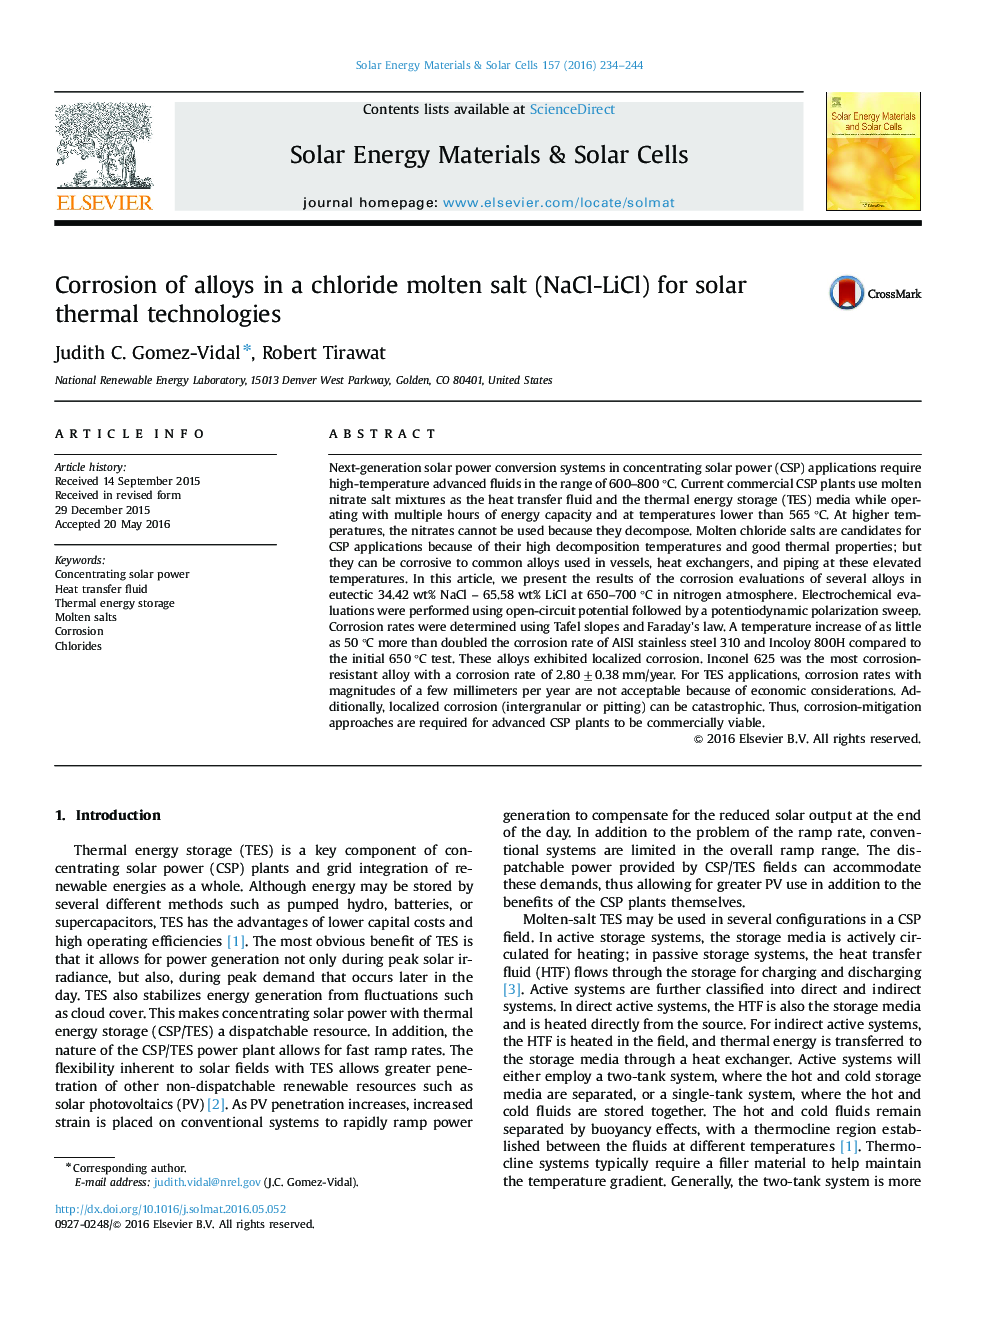 Corrosion of alloys in a chloride molten salt (NaCl-LiCl) for solar thermal technologies